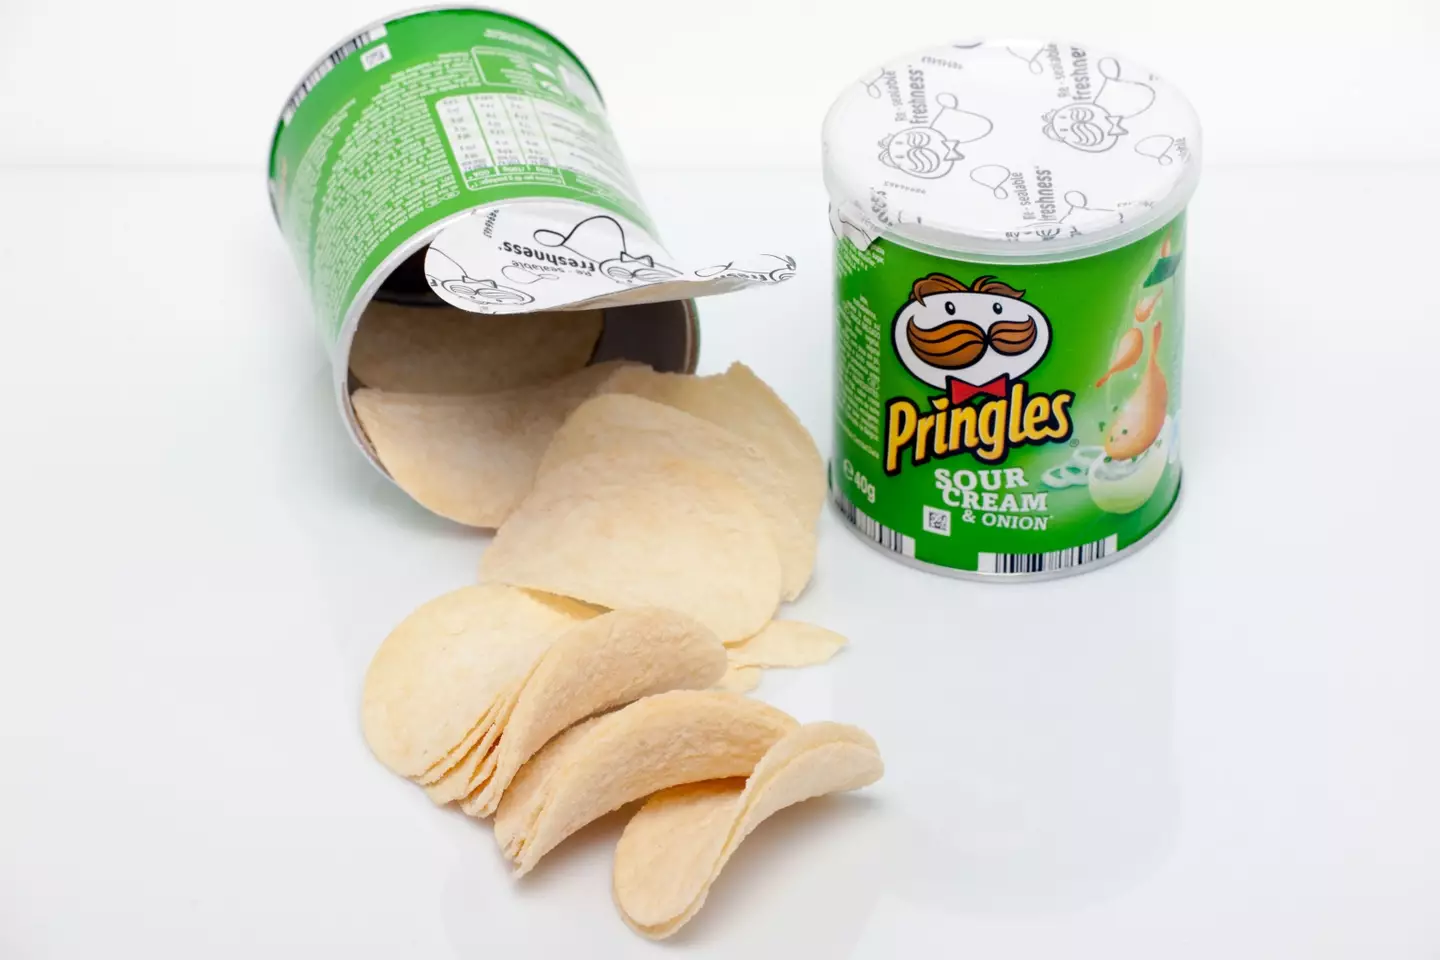 Have the green Pringles always been called 'Sour Cream and Onion'?